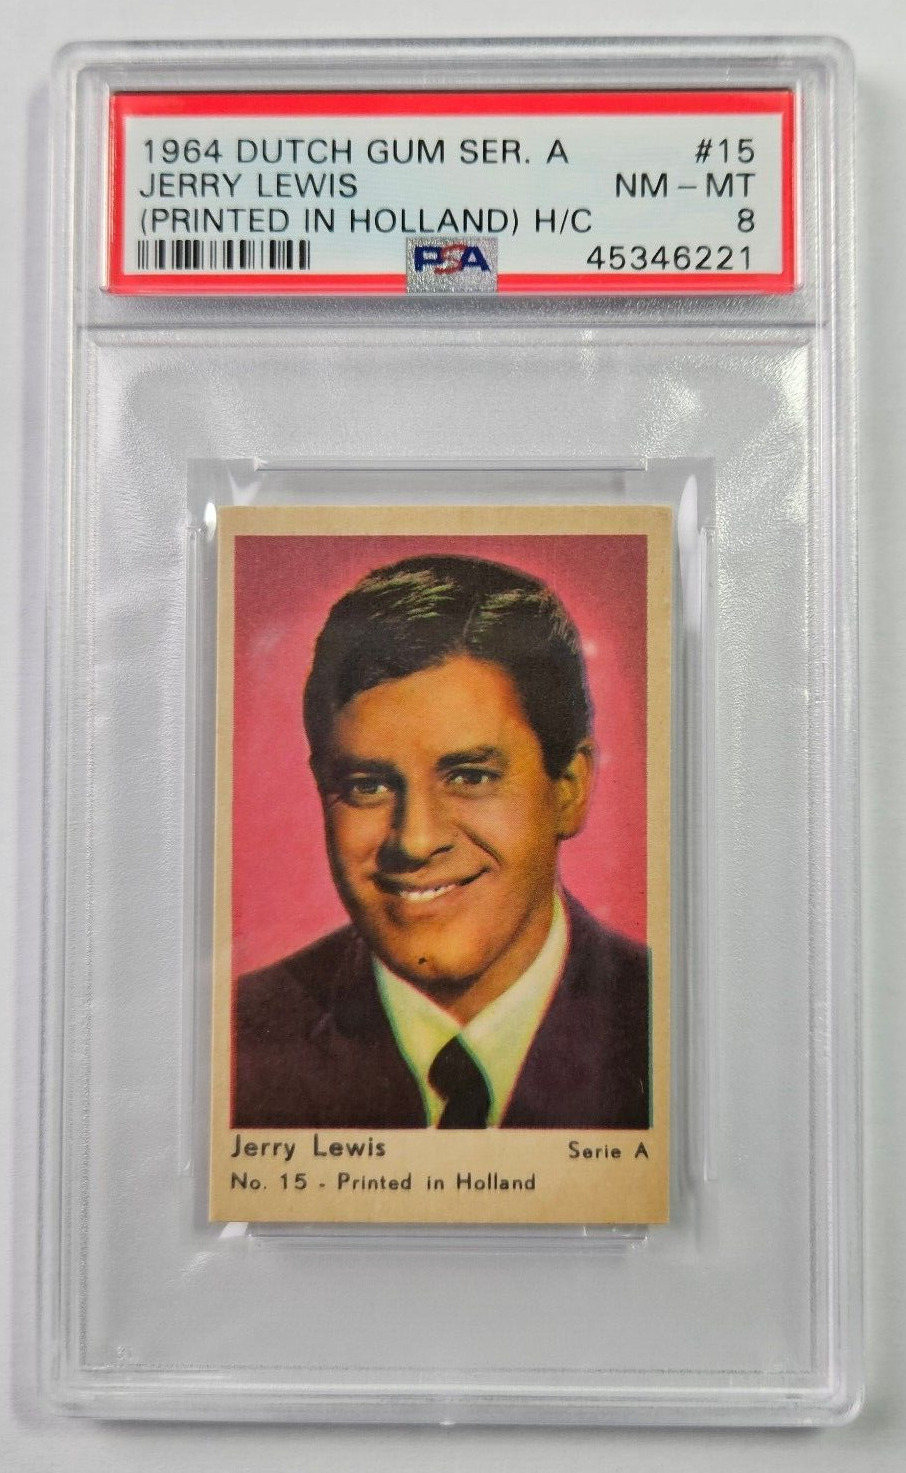 1964 DUTCH GUM Serie A #15 JERRY LEWIS - PSA 8 NM-MT  ONLY 1 GRADED HIGHER (C)